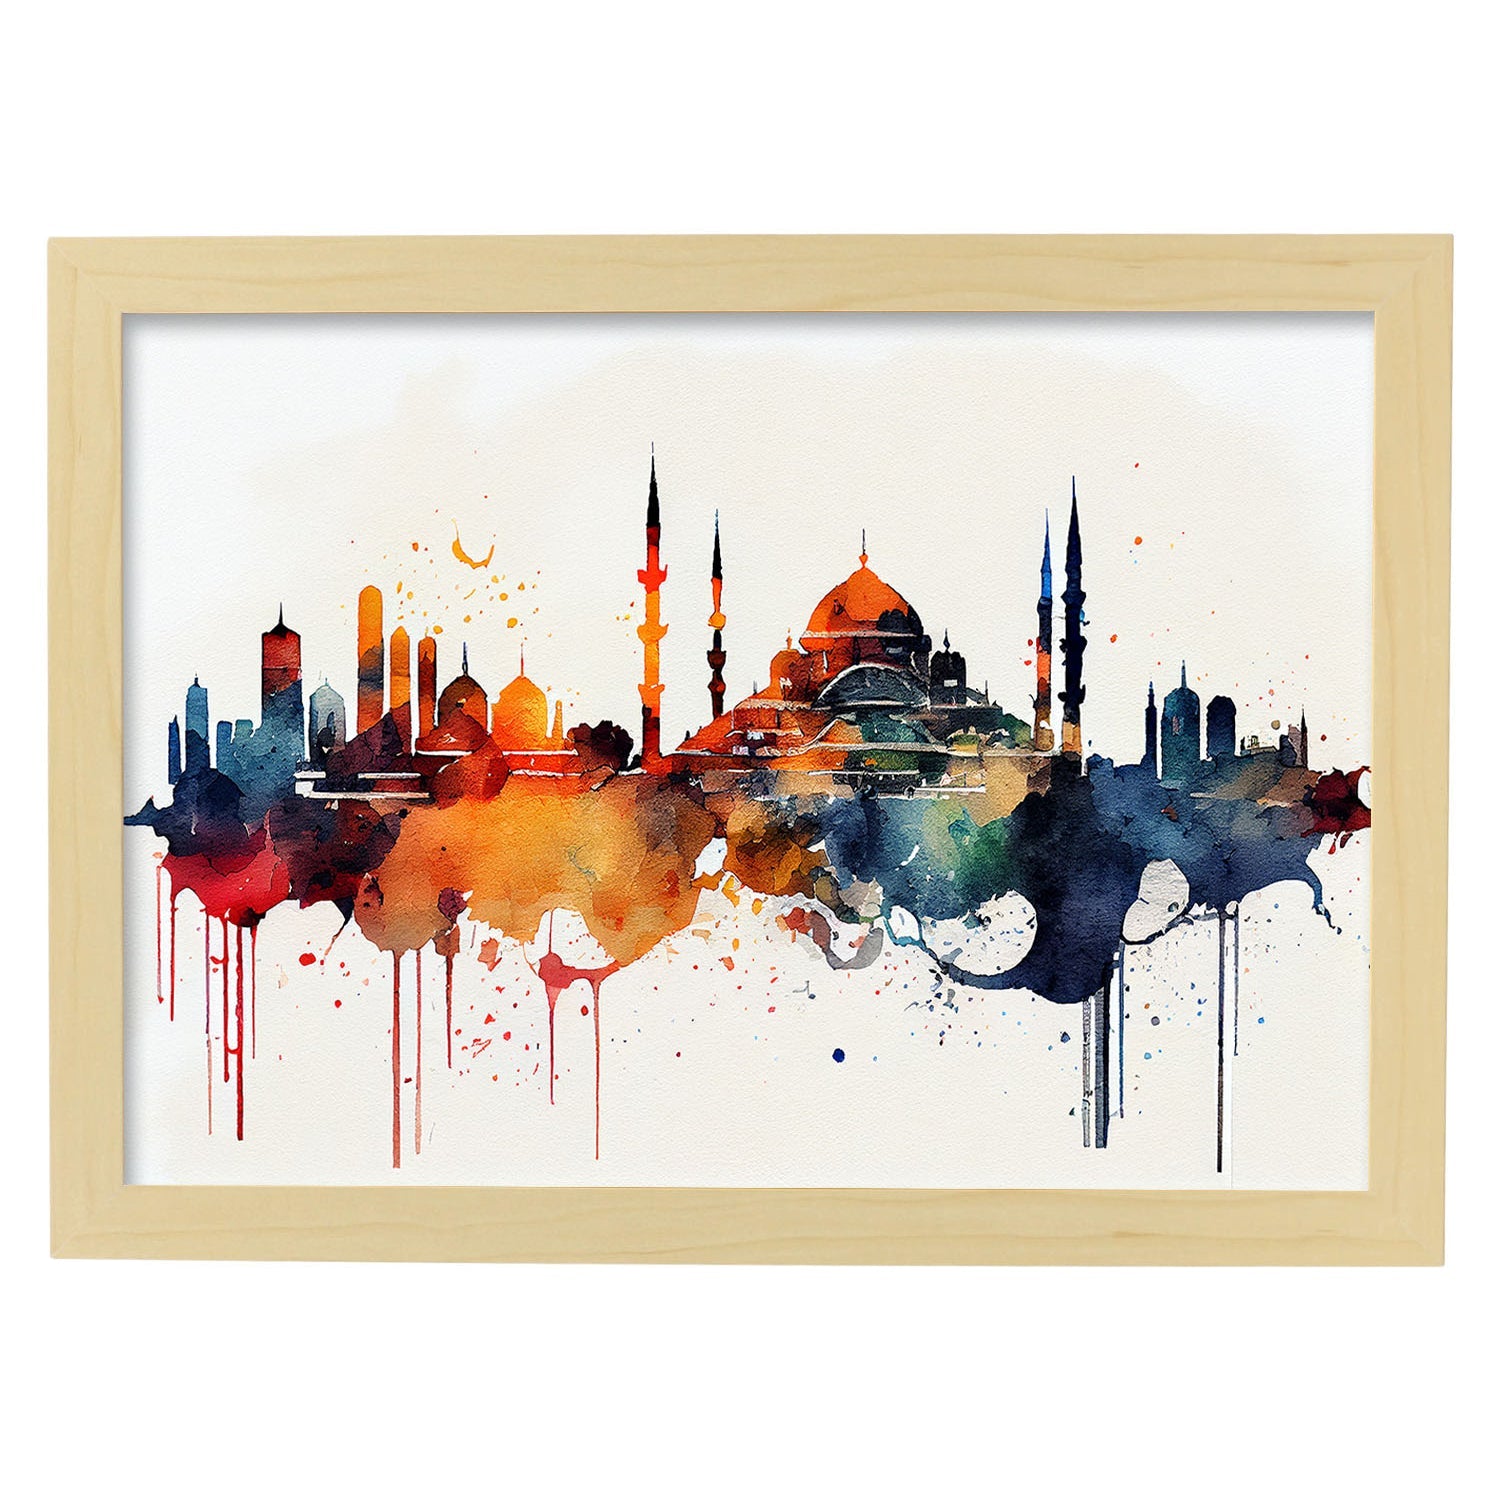 Nacnic watercolor of a skyline of the city of Istanbul_1. Aesthetic Wall Art Prints for Bedroom or Living Room Design.-Artwork-Nacnic-A4-Marco Madera Clara-Nacnic Estudio SL